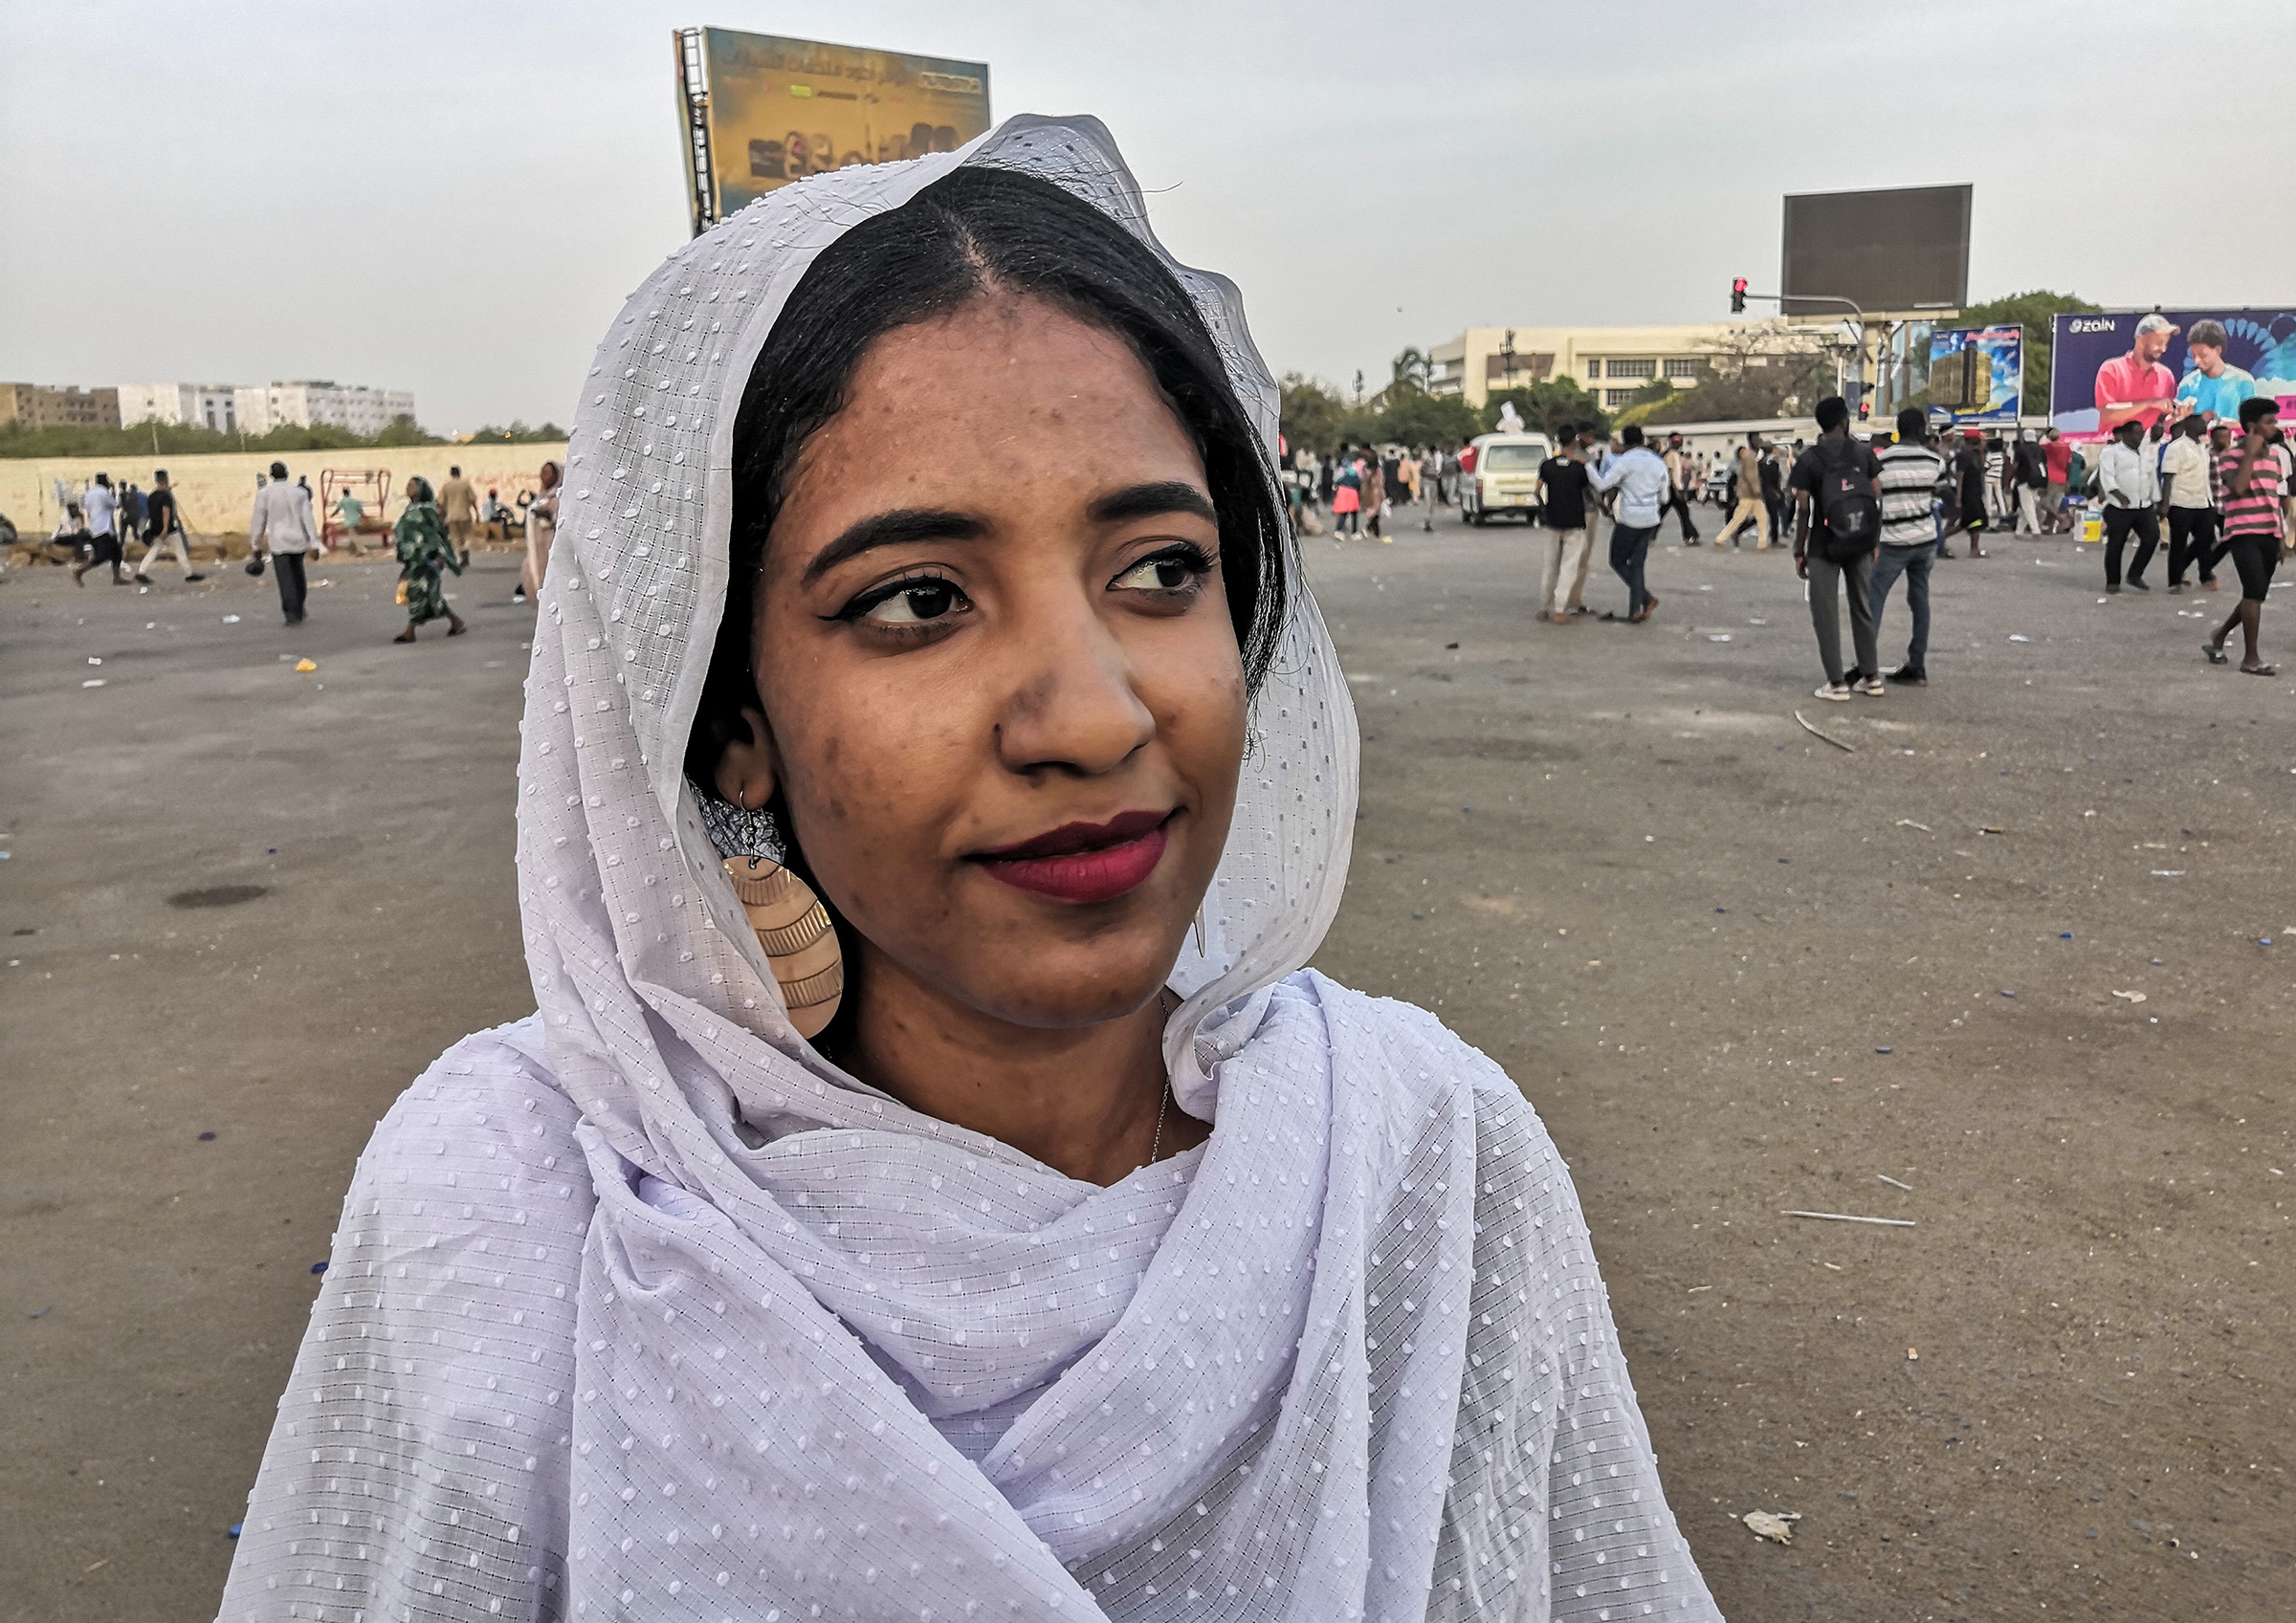 Alaa Salah, a Sudanese woman propelled to internet fame after clips went viral of her leading powerful protest chants against President Omar al-Bashir, attends a demonstration in front of the military headquarters in the capital Khartoum on April 10, 2019. (AFP/Getty Images)